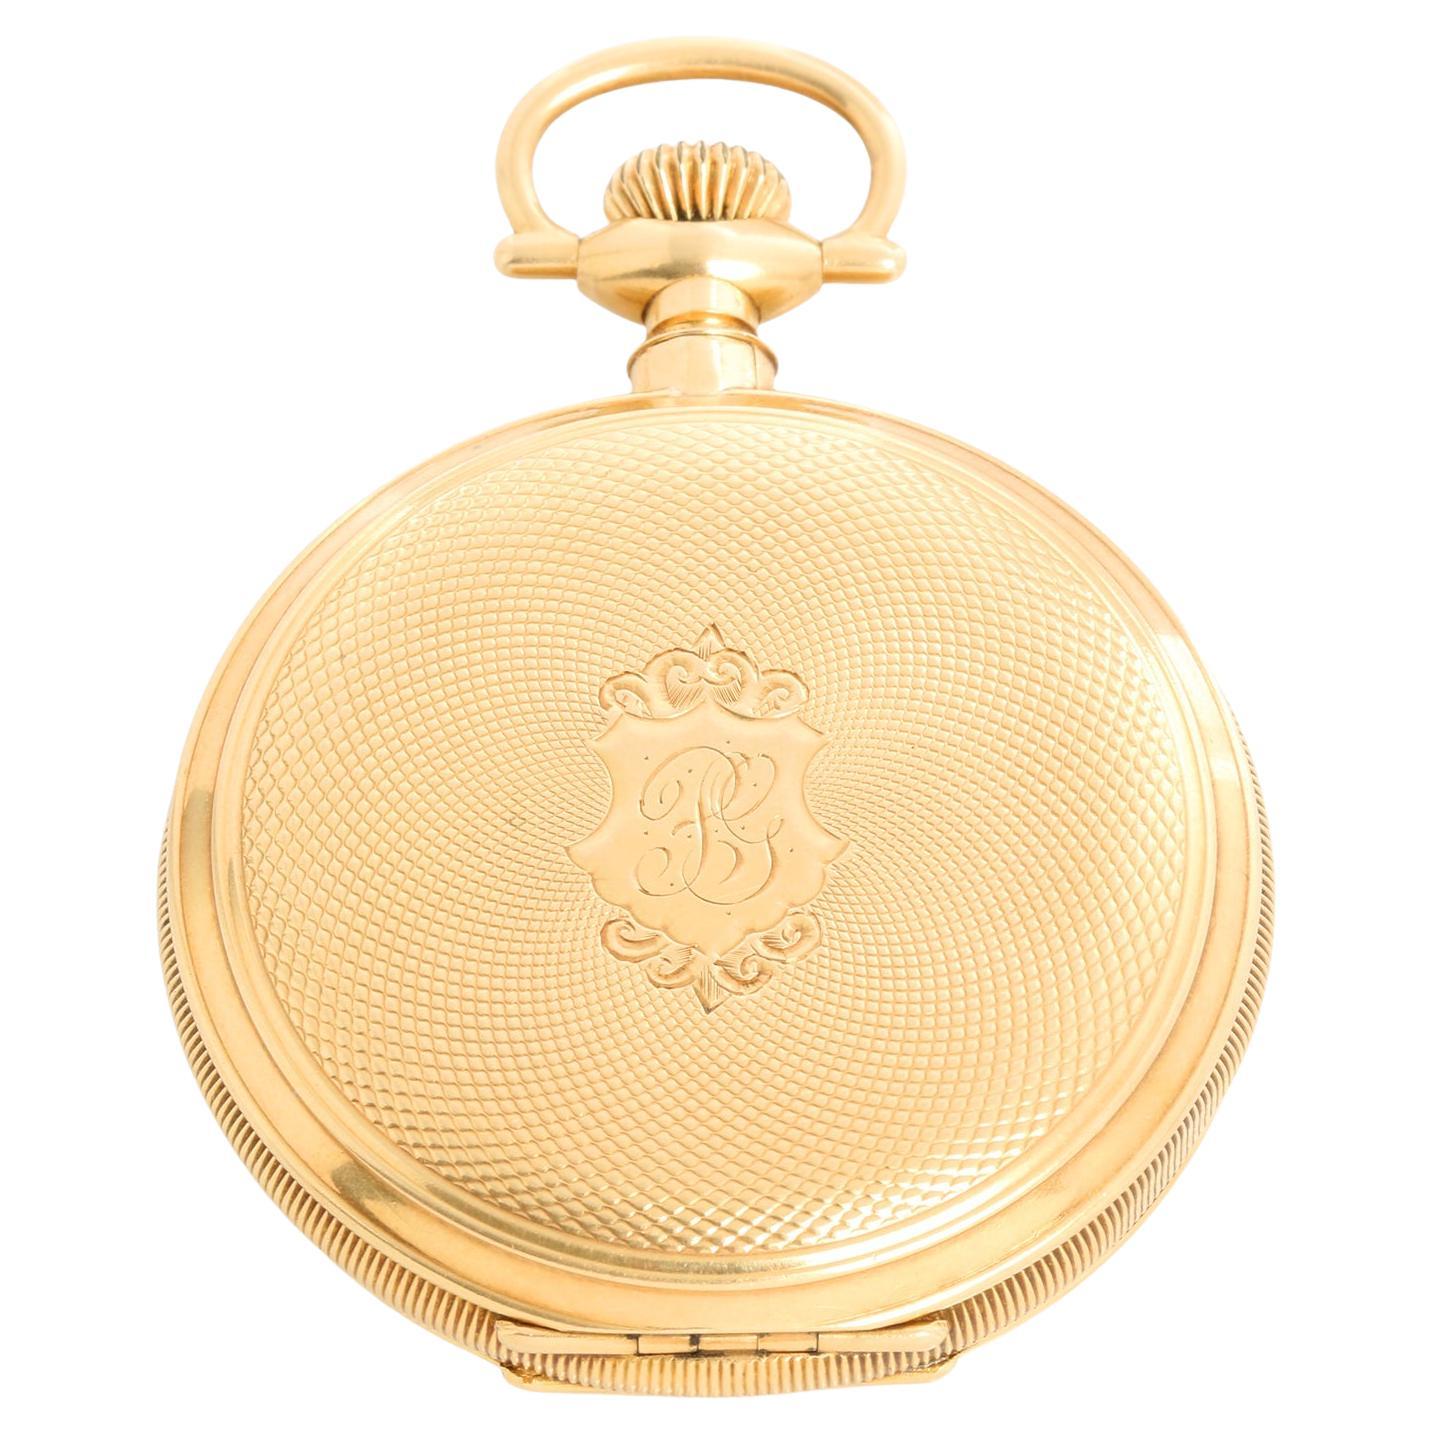 E. Howard Watch Co. 18k Yellow Gold Pocket Watch For Sale